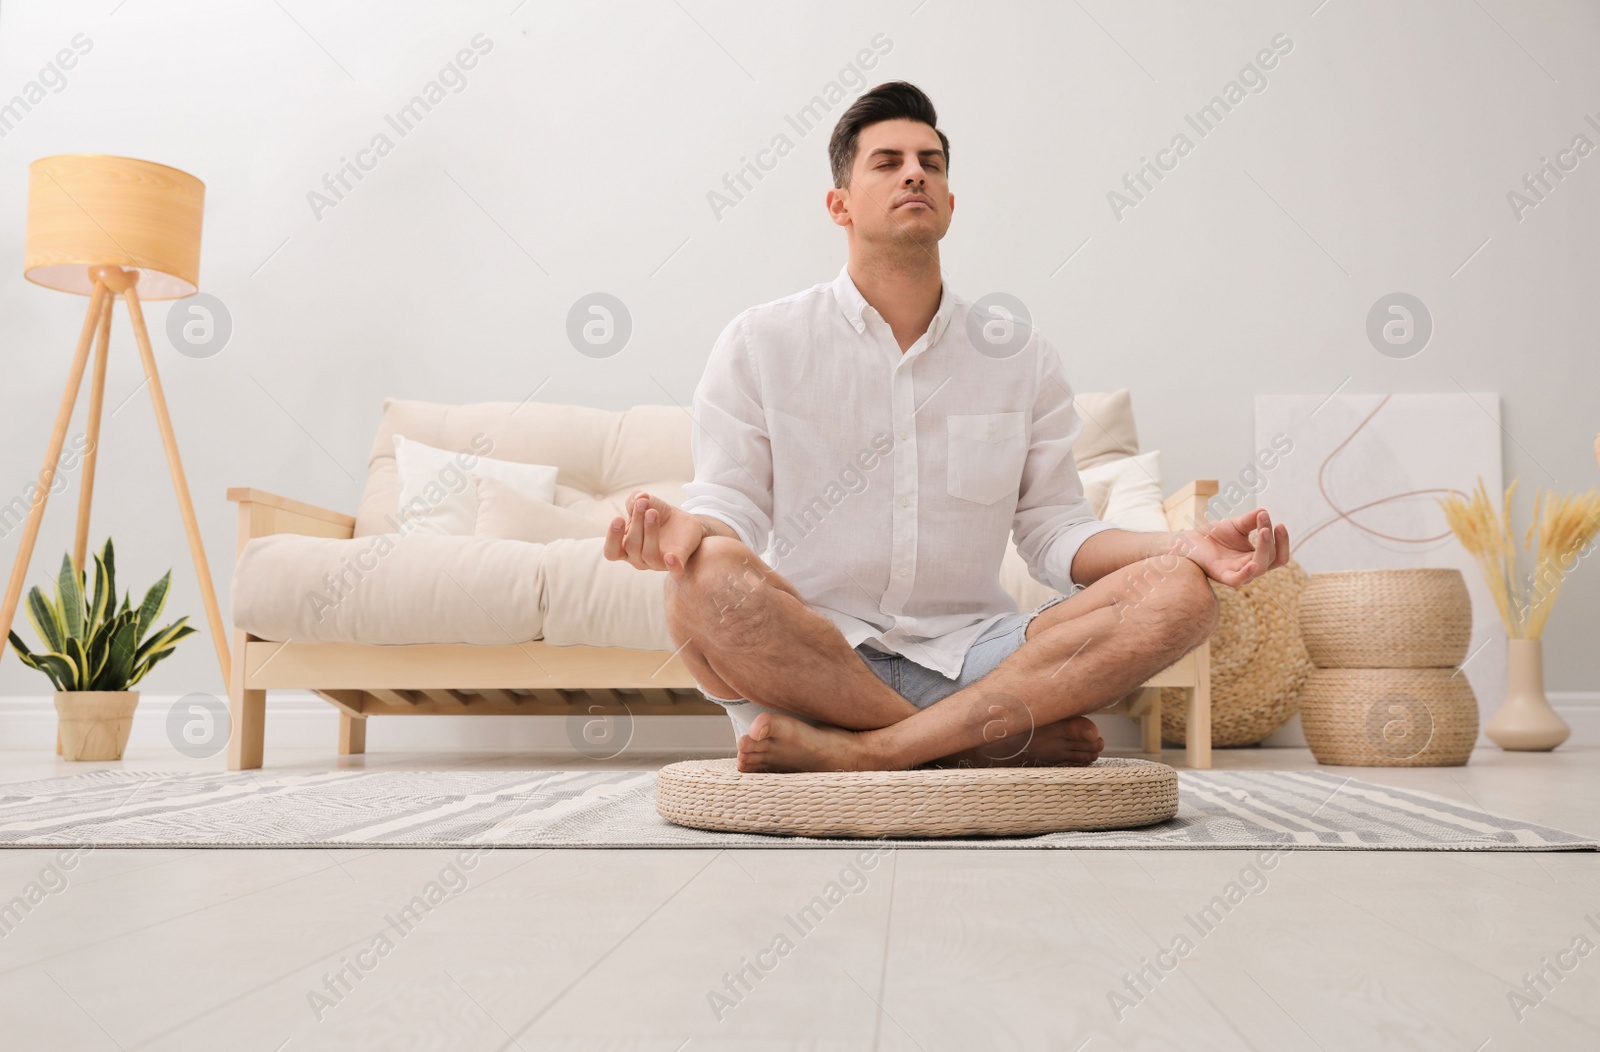 Photo of Man meditating on wicker mat at home